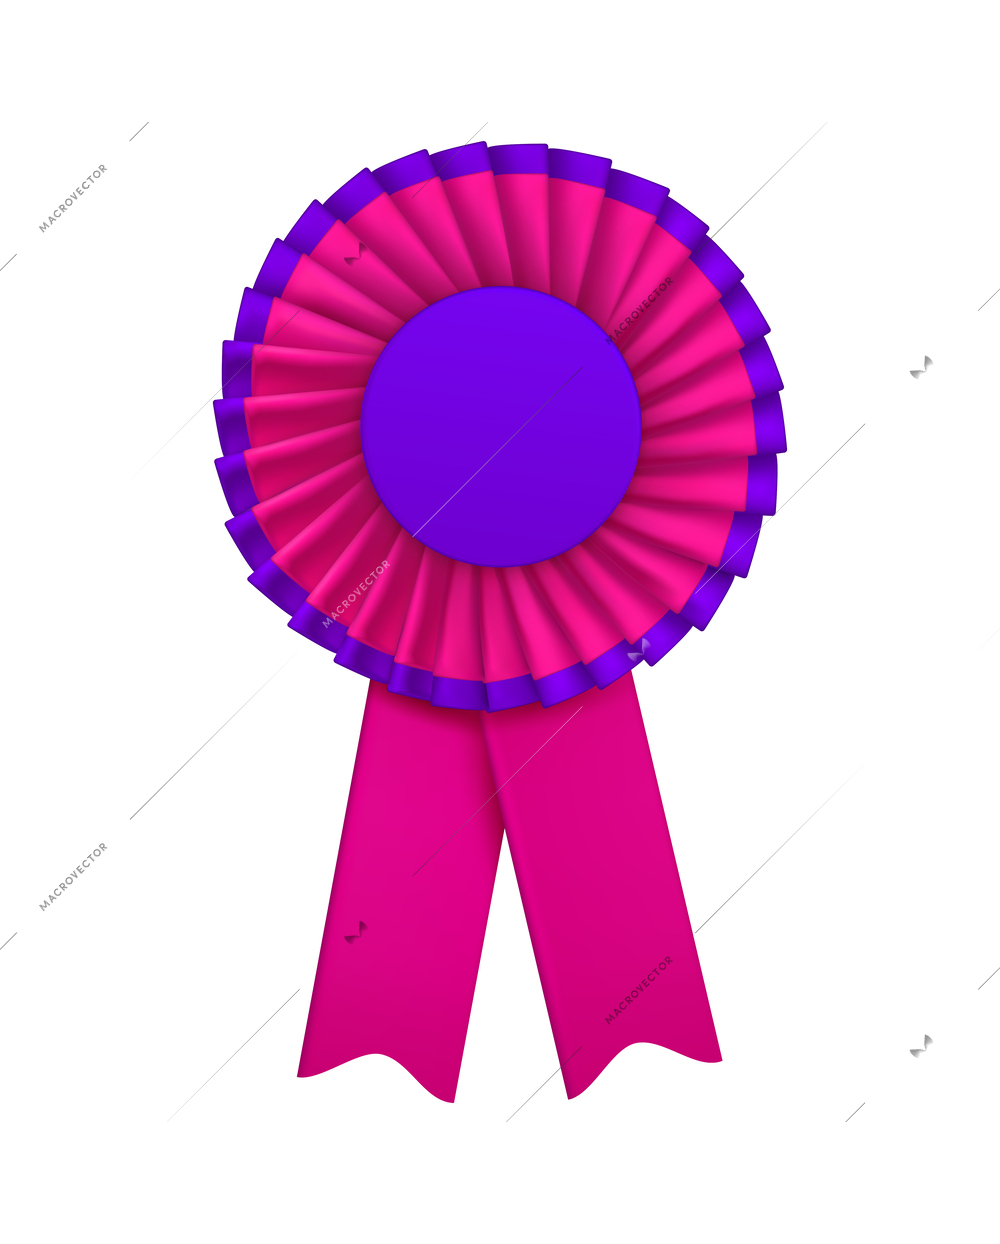 Violet badges rosettes award realistic composition with isolated view of ornate paper badge vector illustration